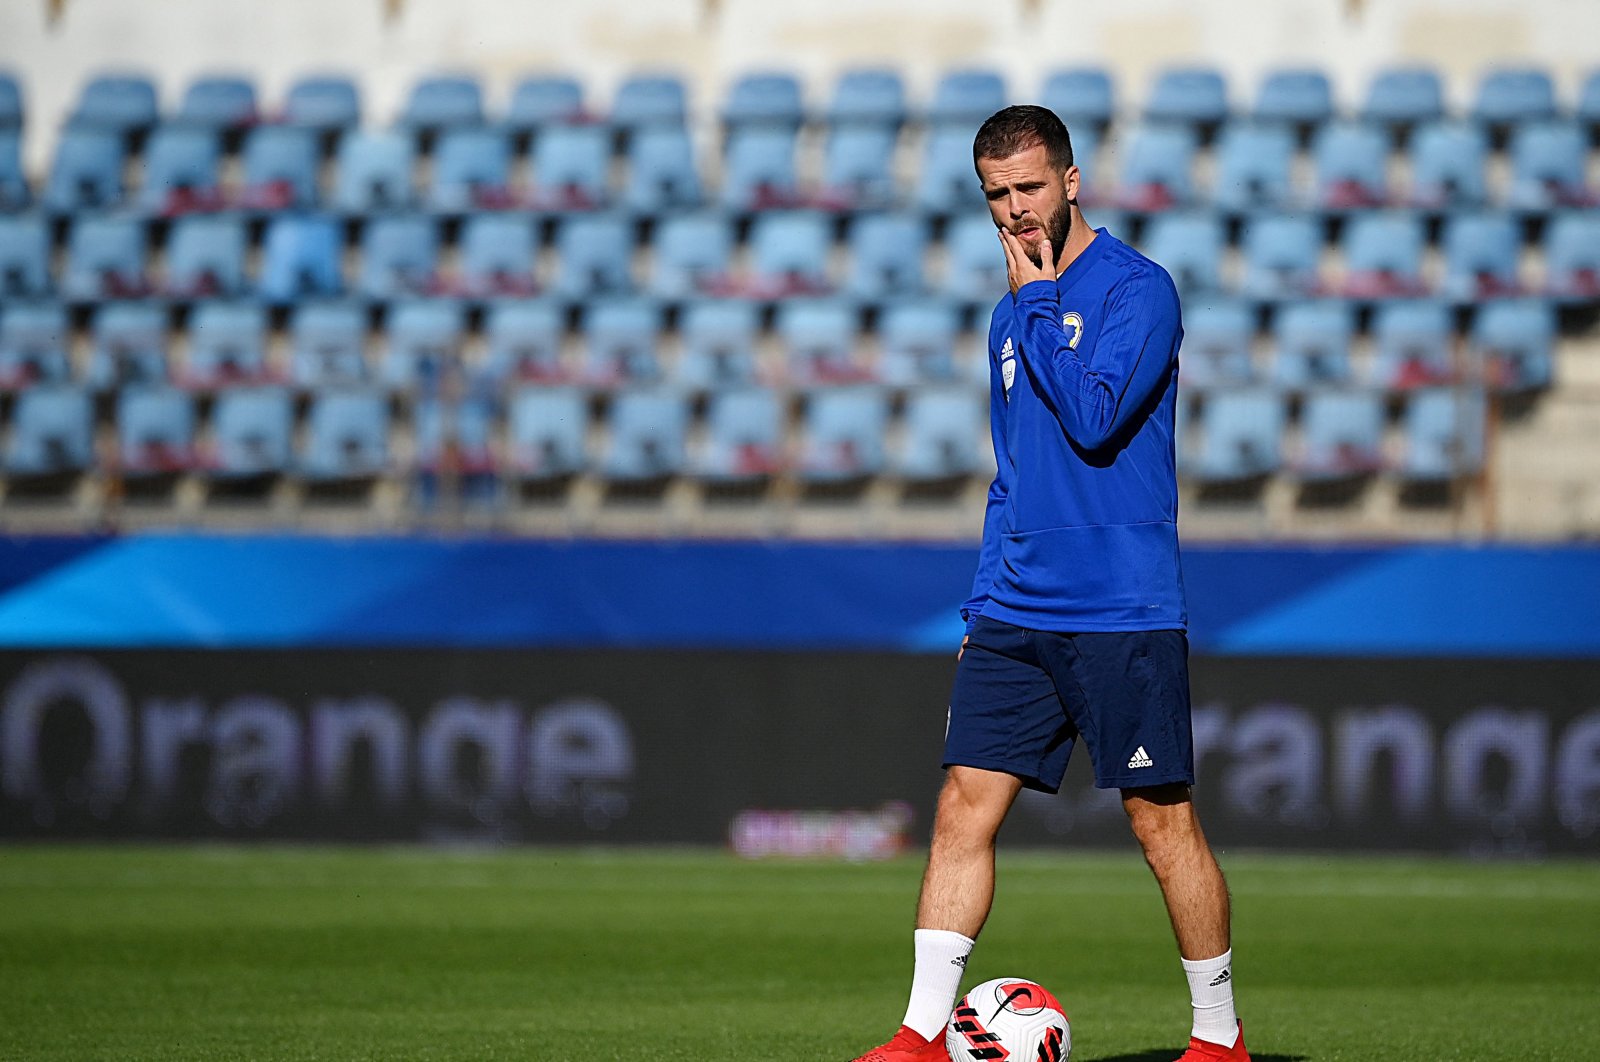 Bosnia-Herzegovina's midfielder Miralem Pjanic attending a training session at the Meineau stadium in Strasbourg, France, Aug. 31, 2021, on the eve of the FIFA World Cup Qatar 2022 qualification Group D football match between France and Bosnia-Herzegovina. (Franck Fife / AFP Photo)